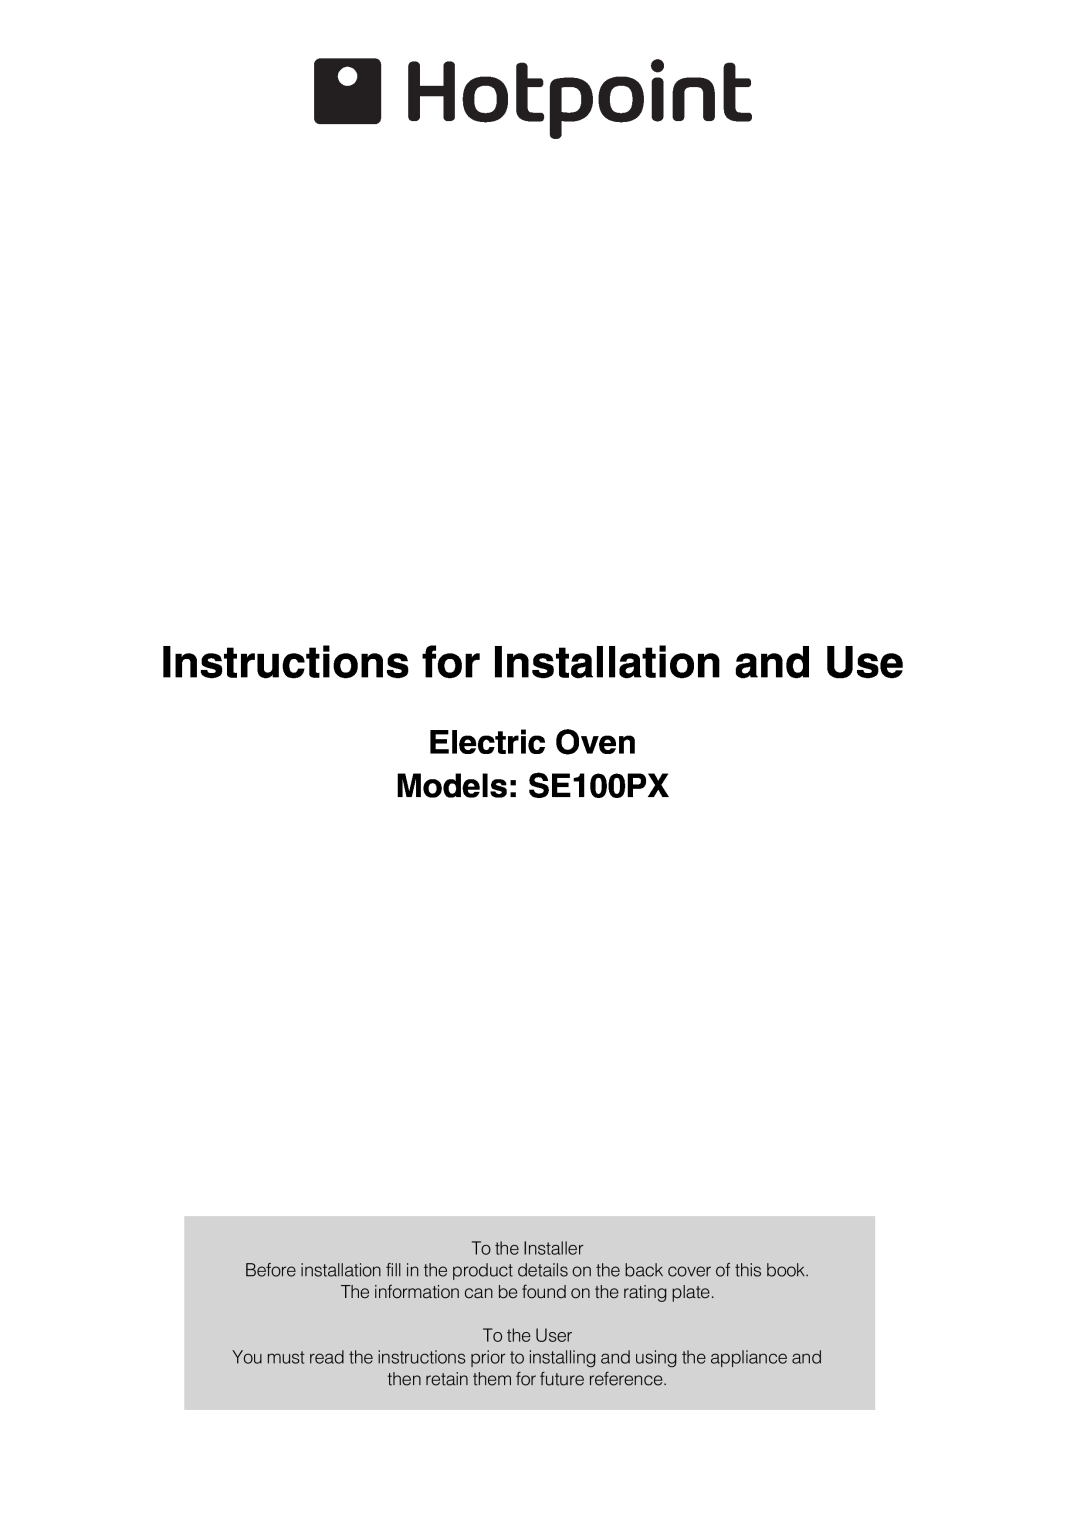 Hotpoint manual Instructions for Installation and Use, Electric Oven Models SE100PX 